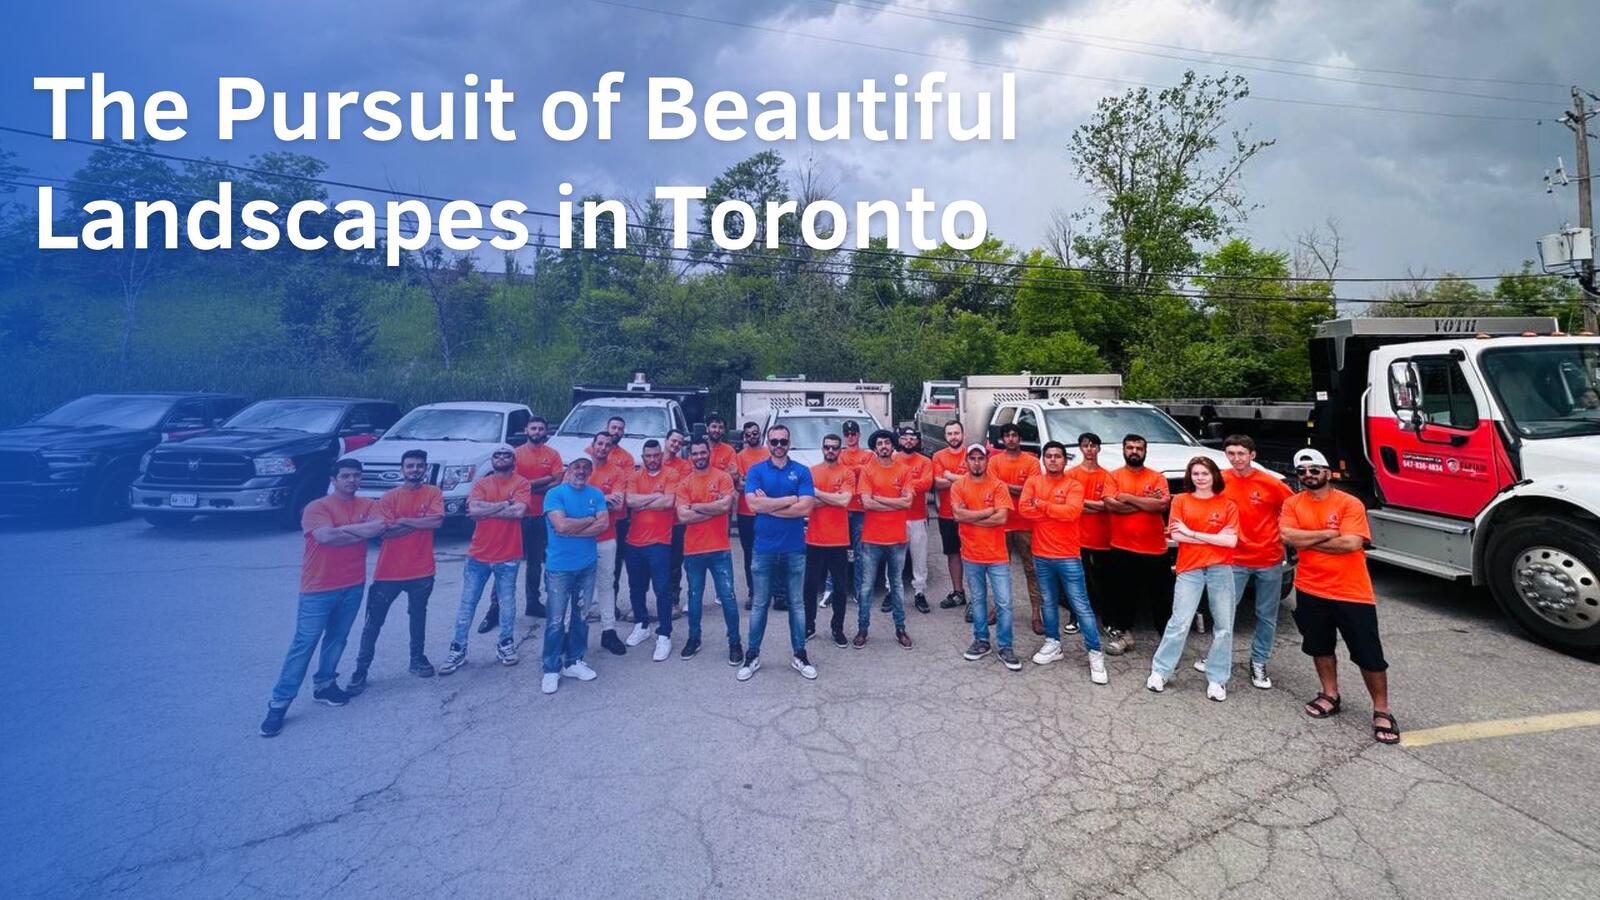 The Pursuit of Beautiful Landscapers in Toronto